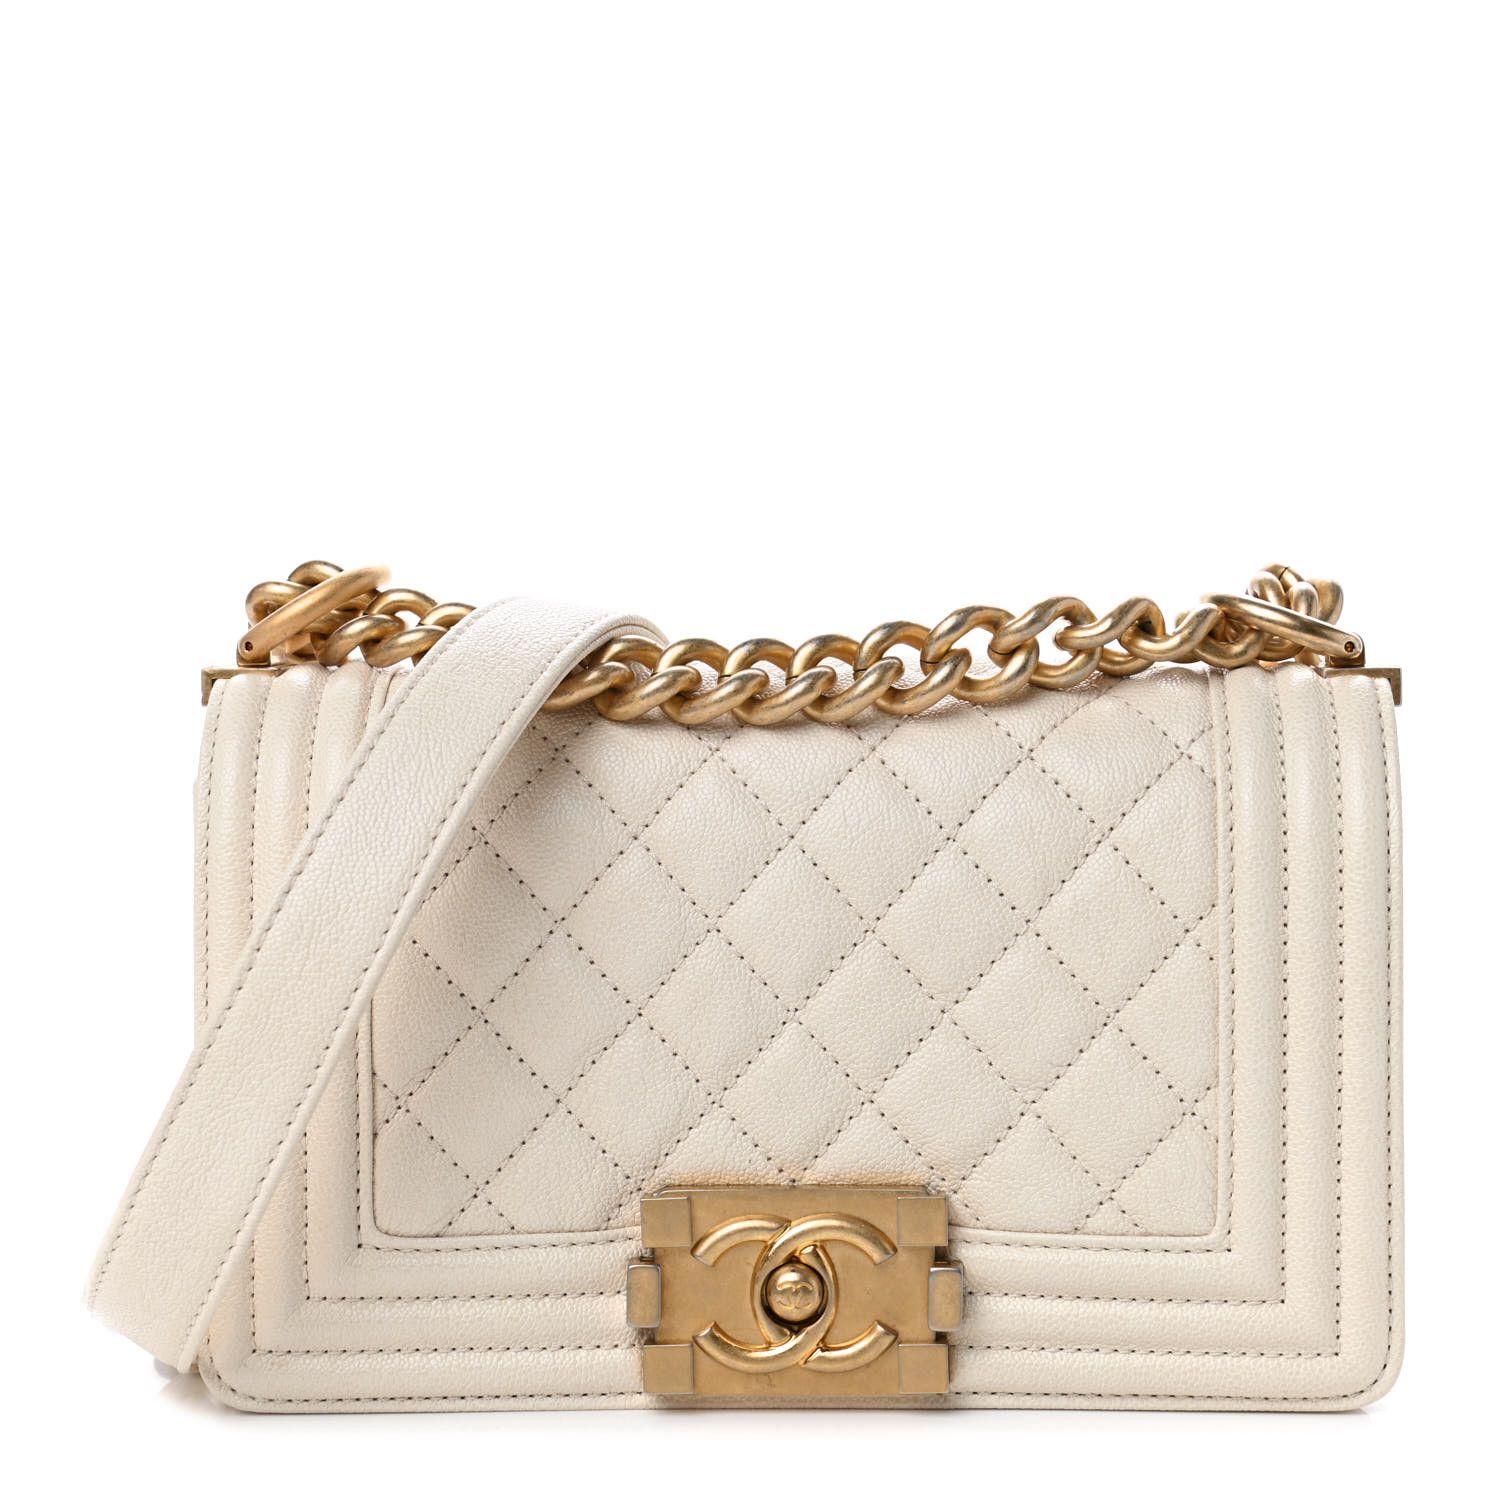 CHANEL Caviar Quilted Small Boy Flap White | FASHIONPHILE | Fashionphile